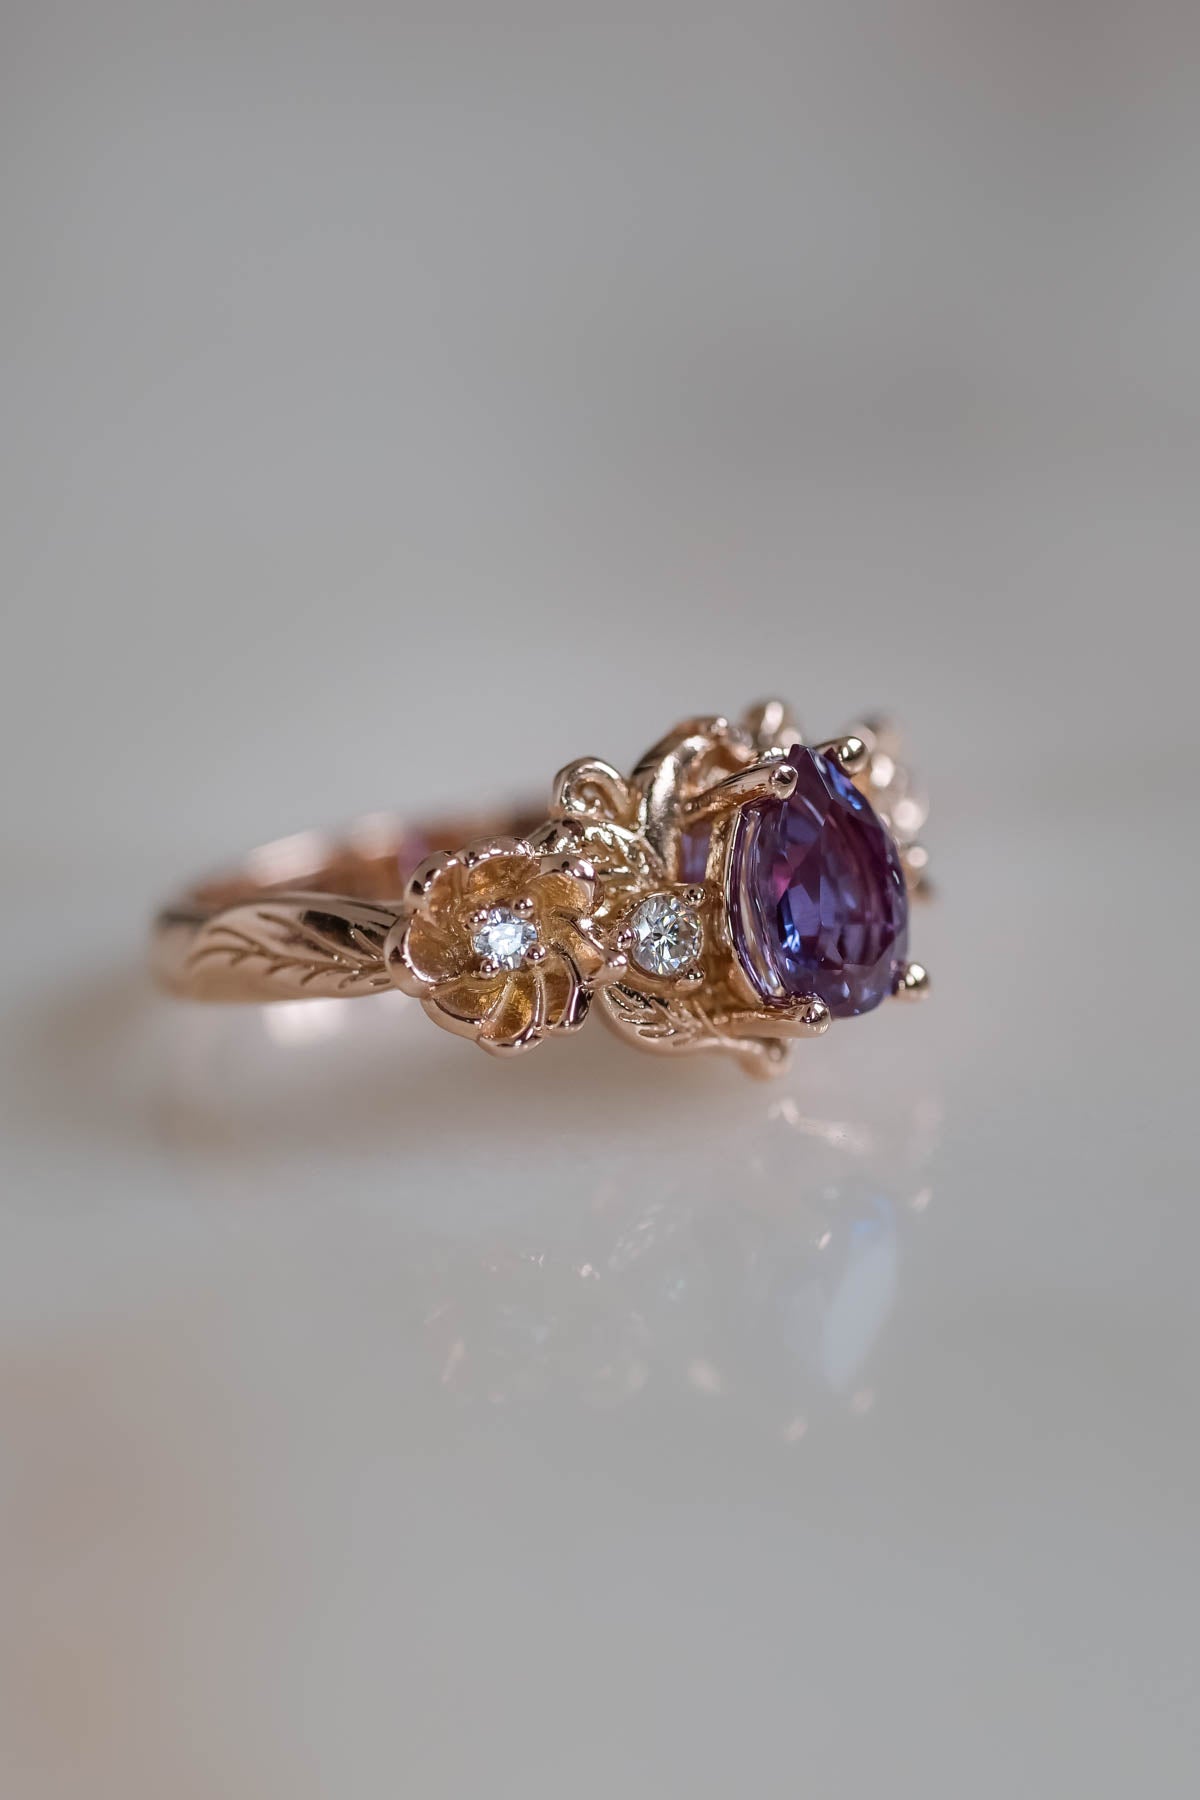 vintage alexandrite engagement ring with flowers in gold with diamonds side stones